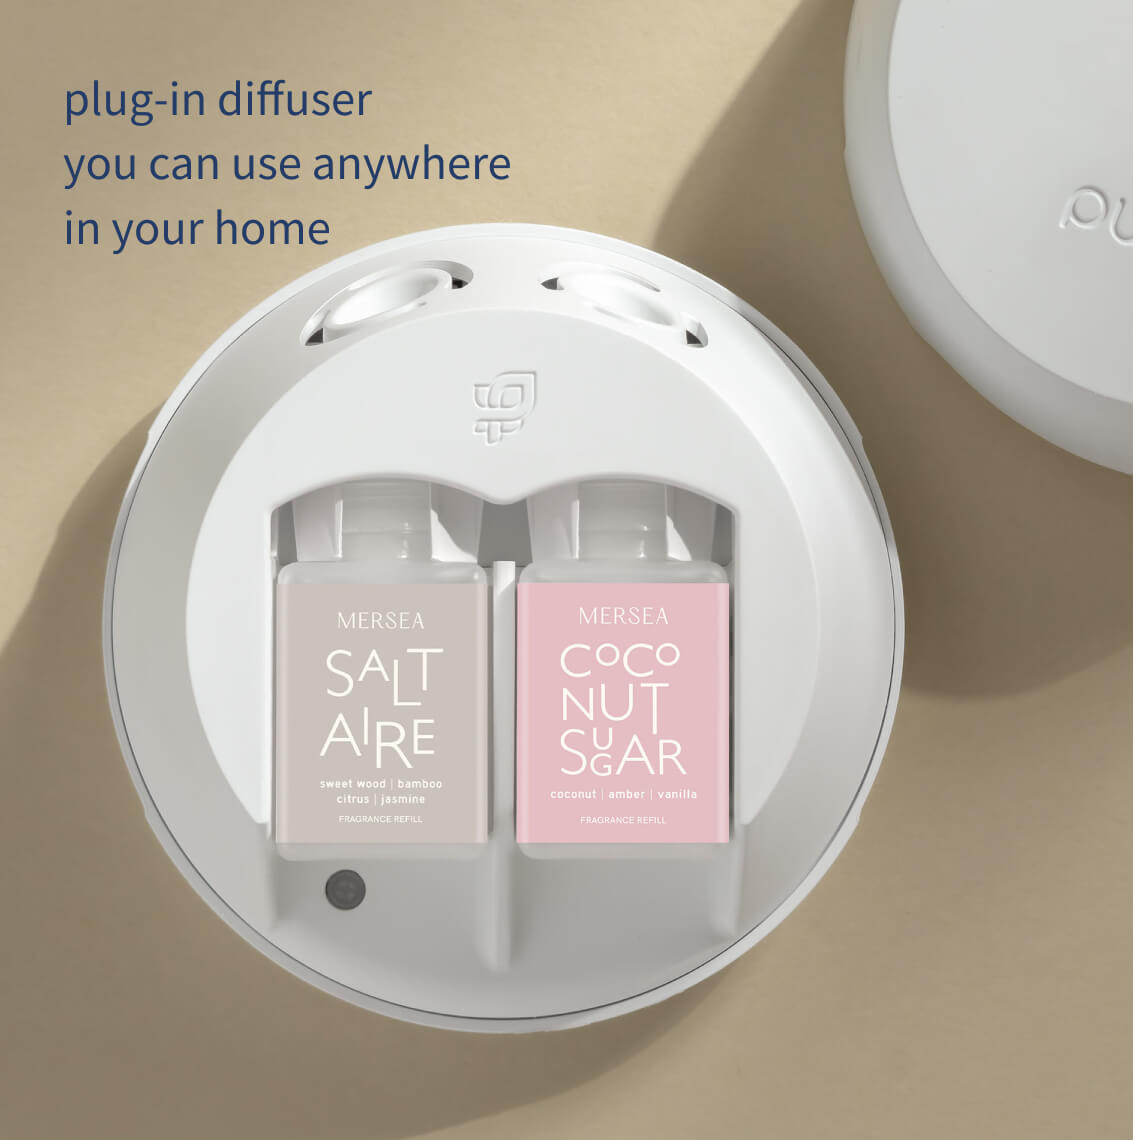 pura plugin diffuser uncovered holding mersea saltaire and coconut sugar smart inserts